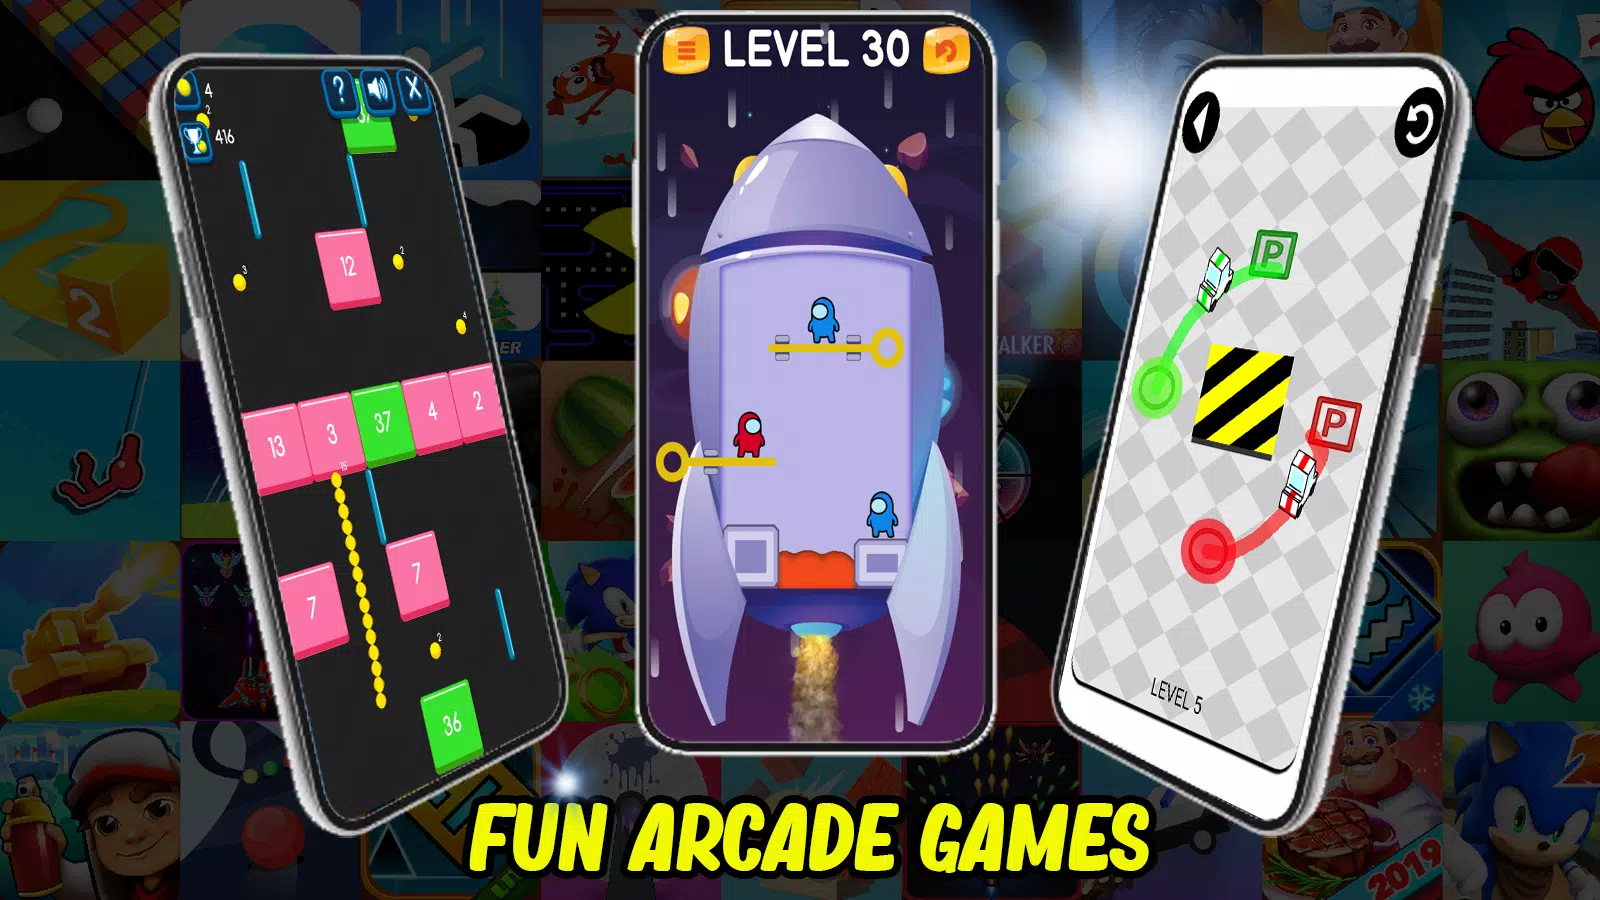 1 2 3 4 Player Games - Offline android iOS apk download for free